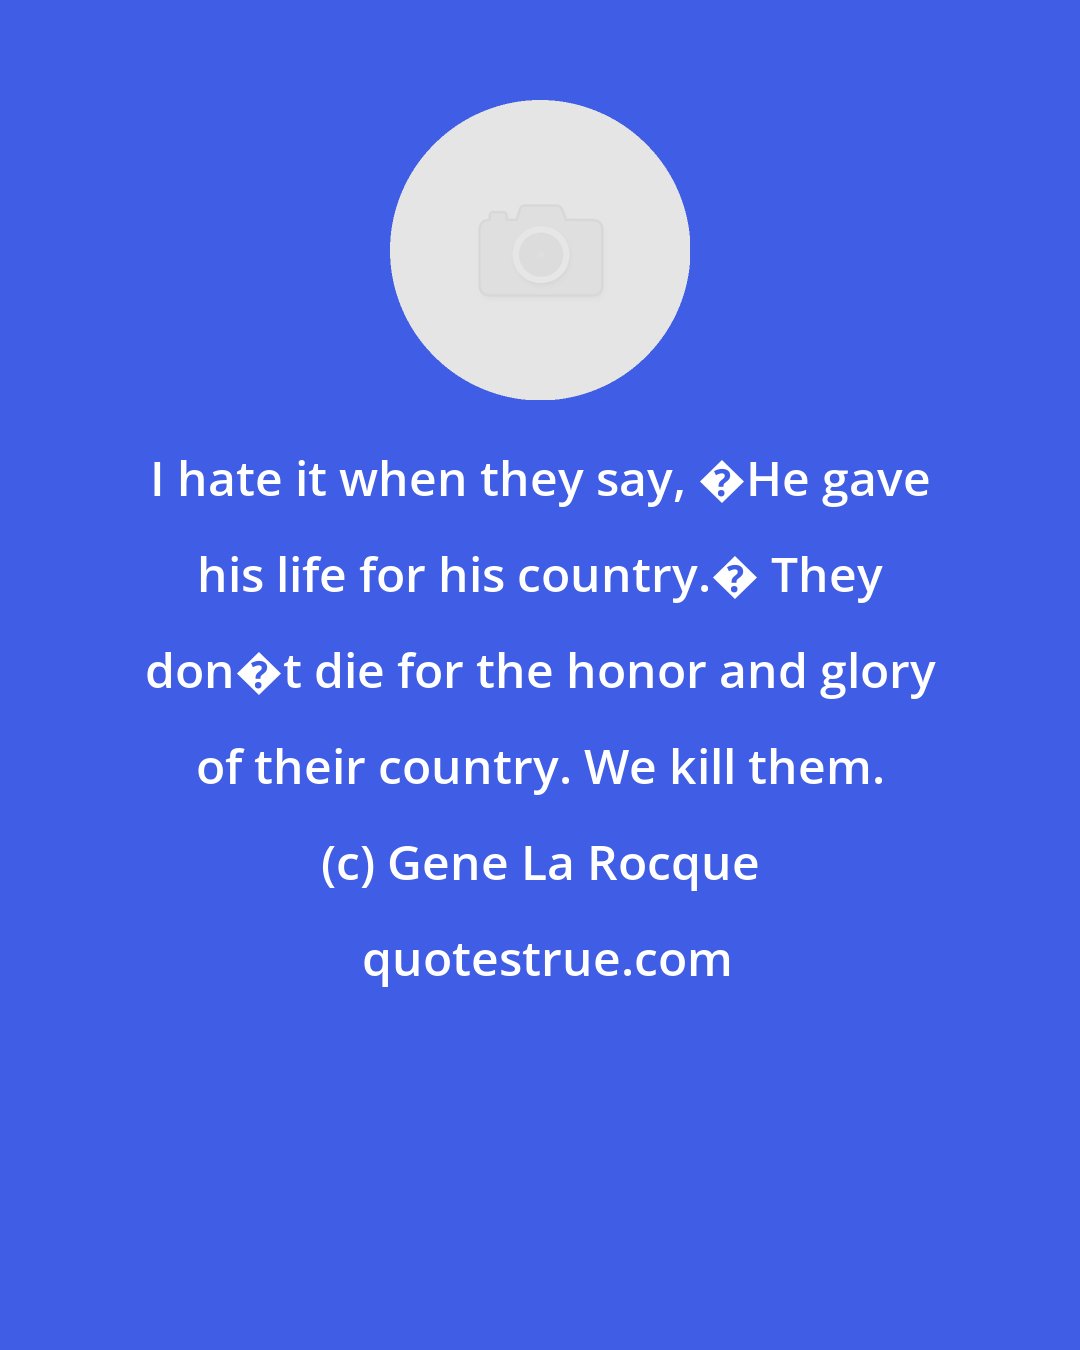 Gene La Rocque: I hate it when they say, �He gave his life for his country.� They don�t die for the honor and glory of their country. We kill them.